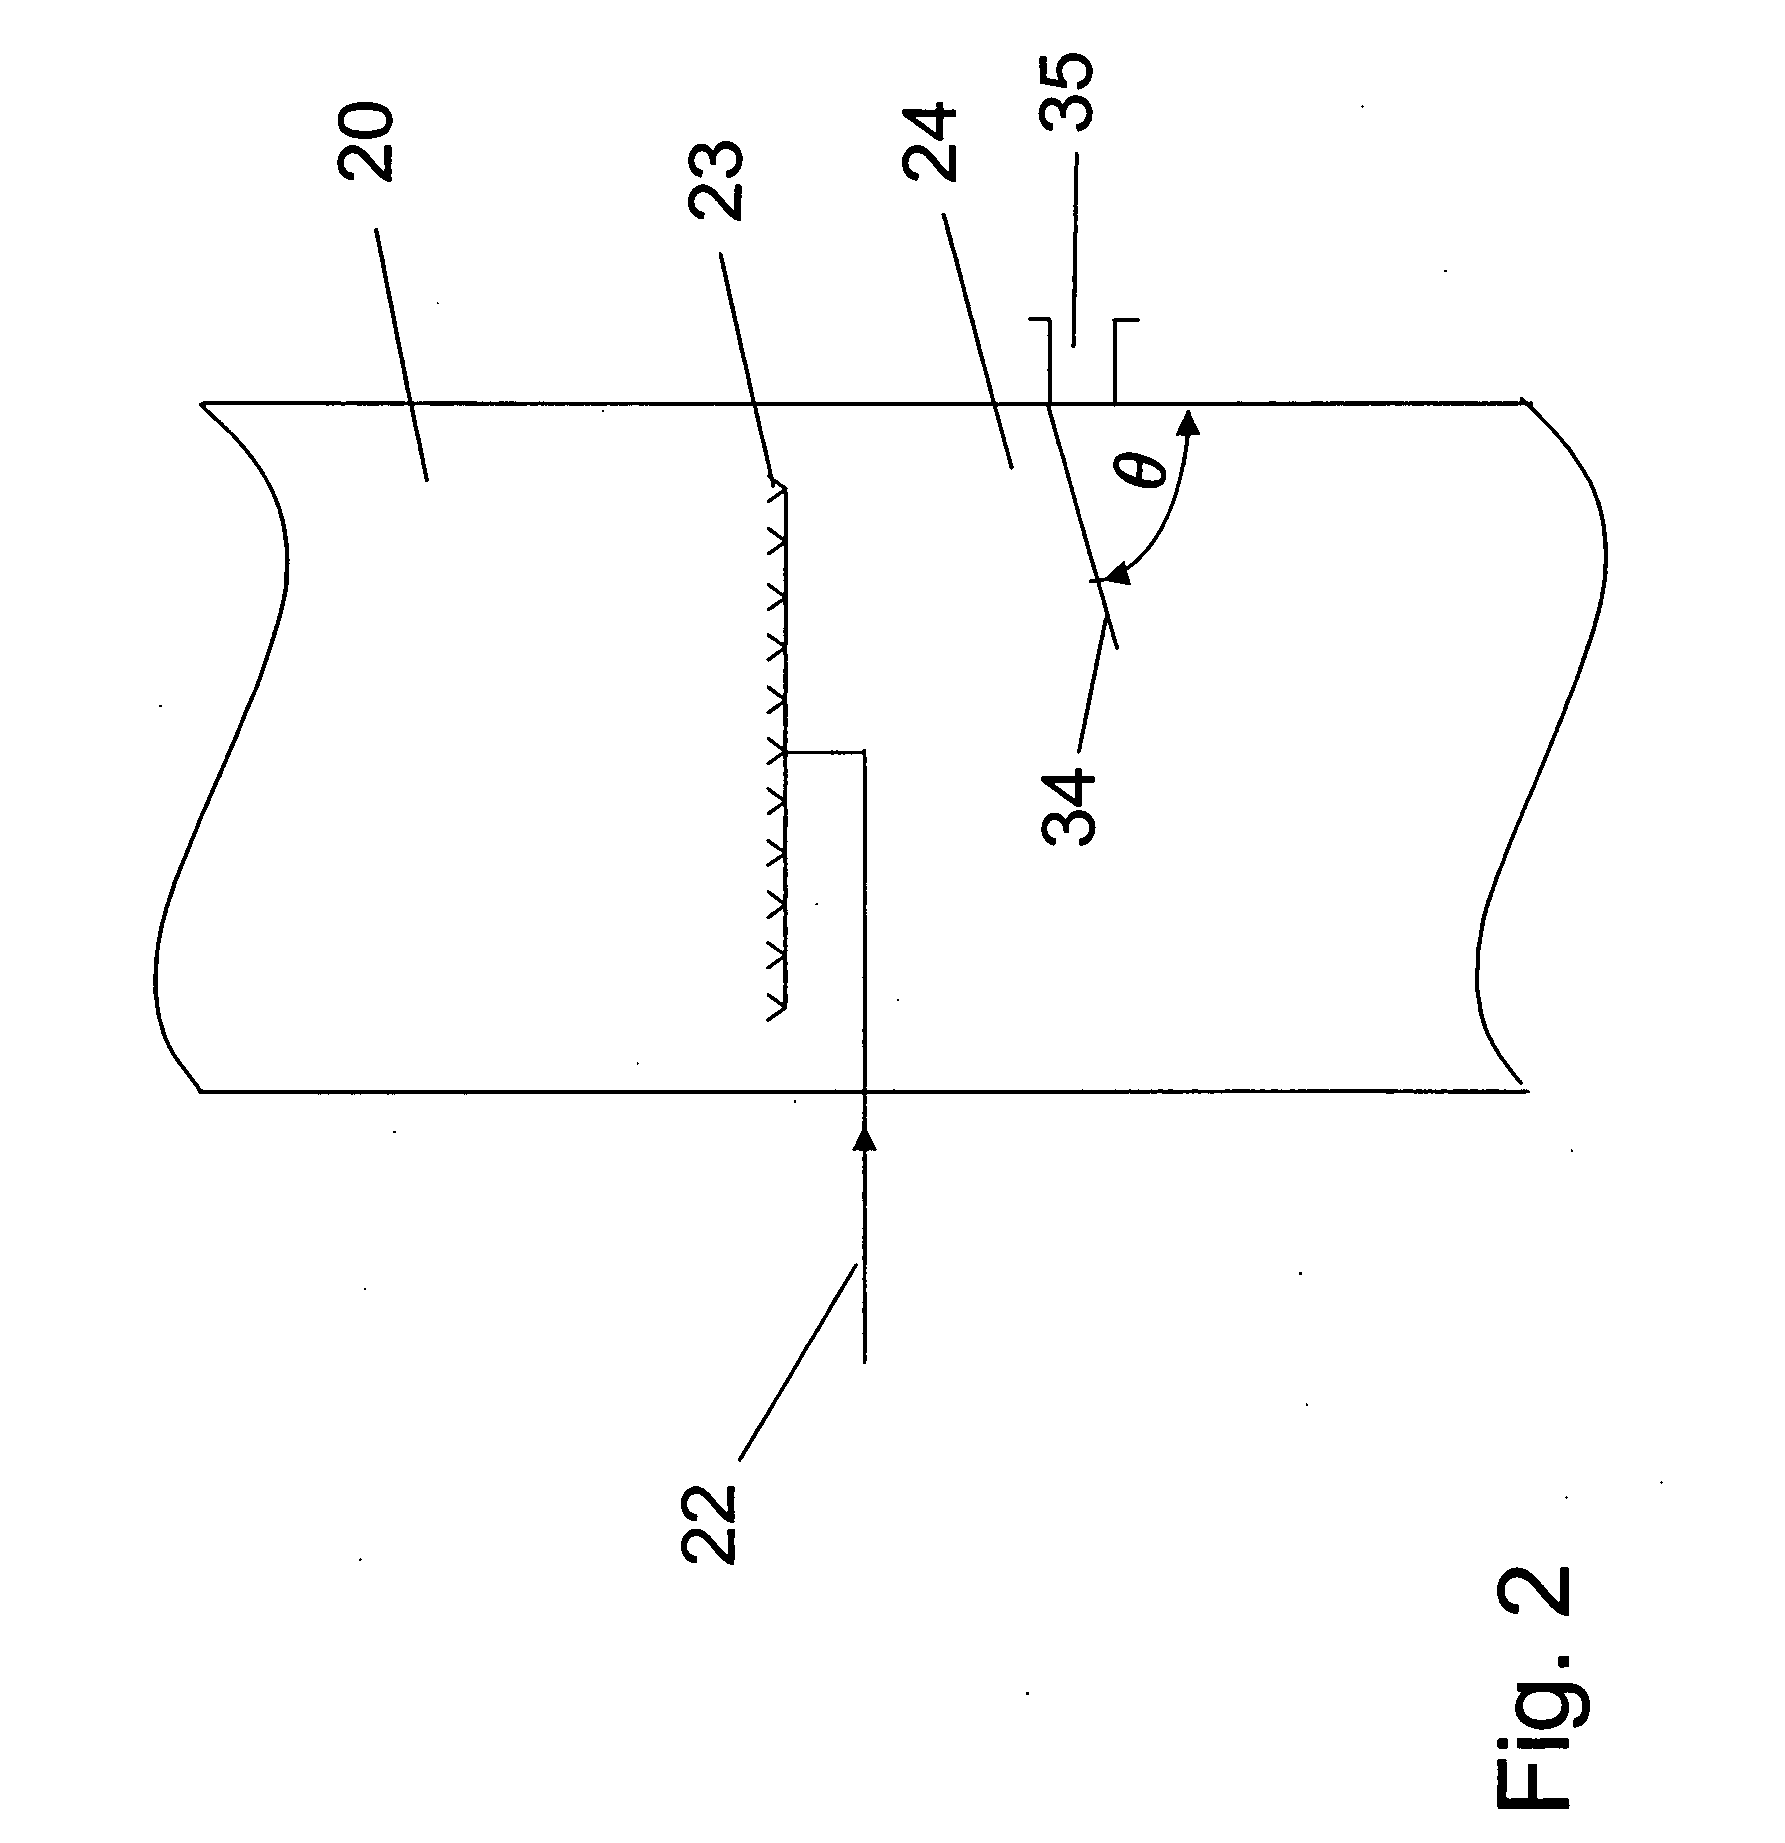 Process for removing sulfur particles from an aqueous catalyst solution and for removing hydrogen sulfide and recovering sulfur from a gas stream